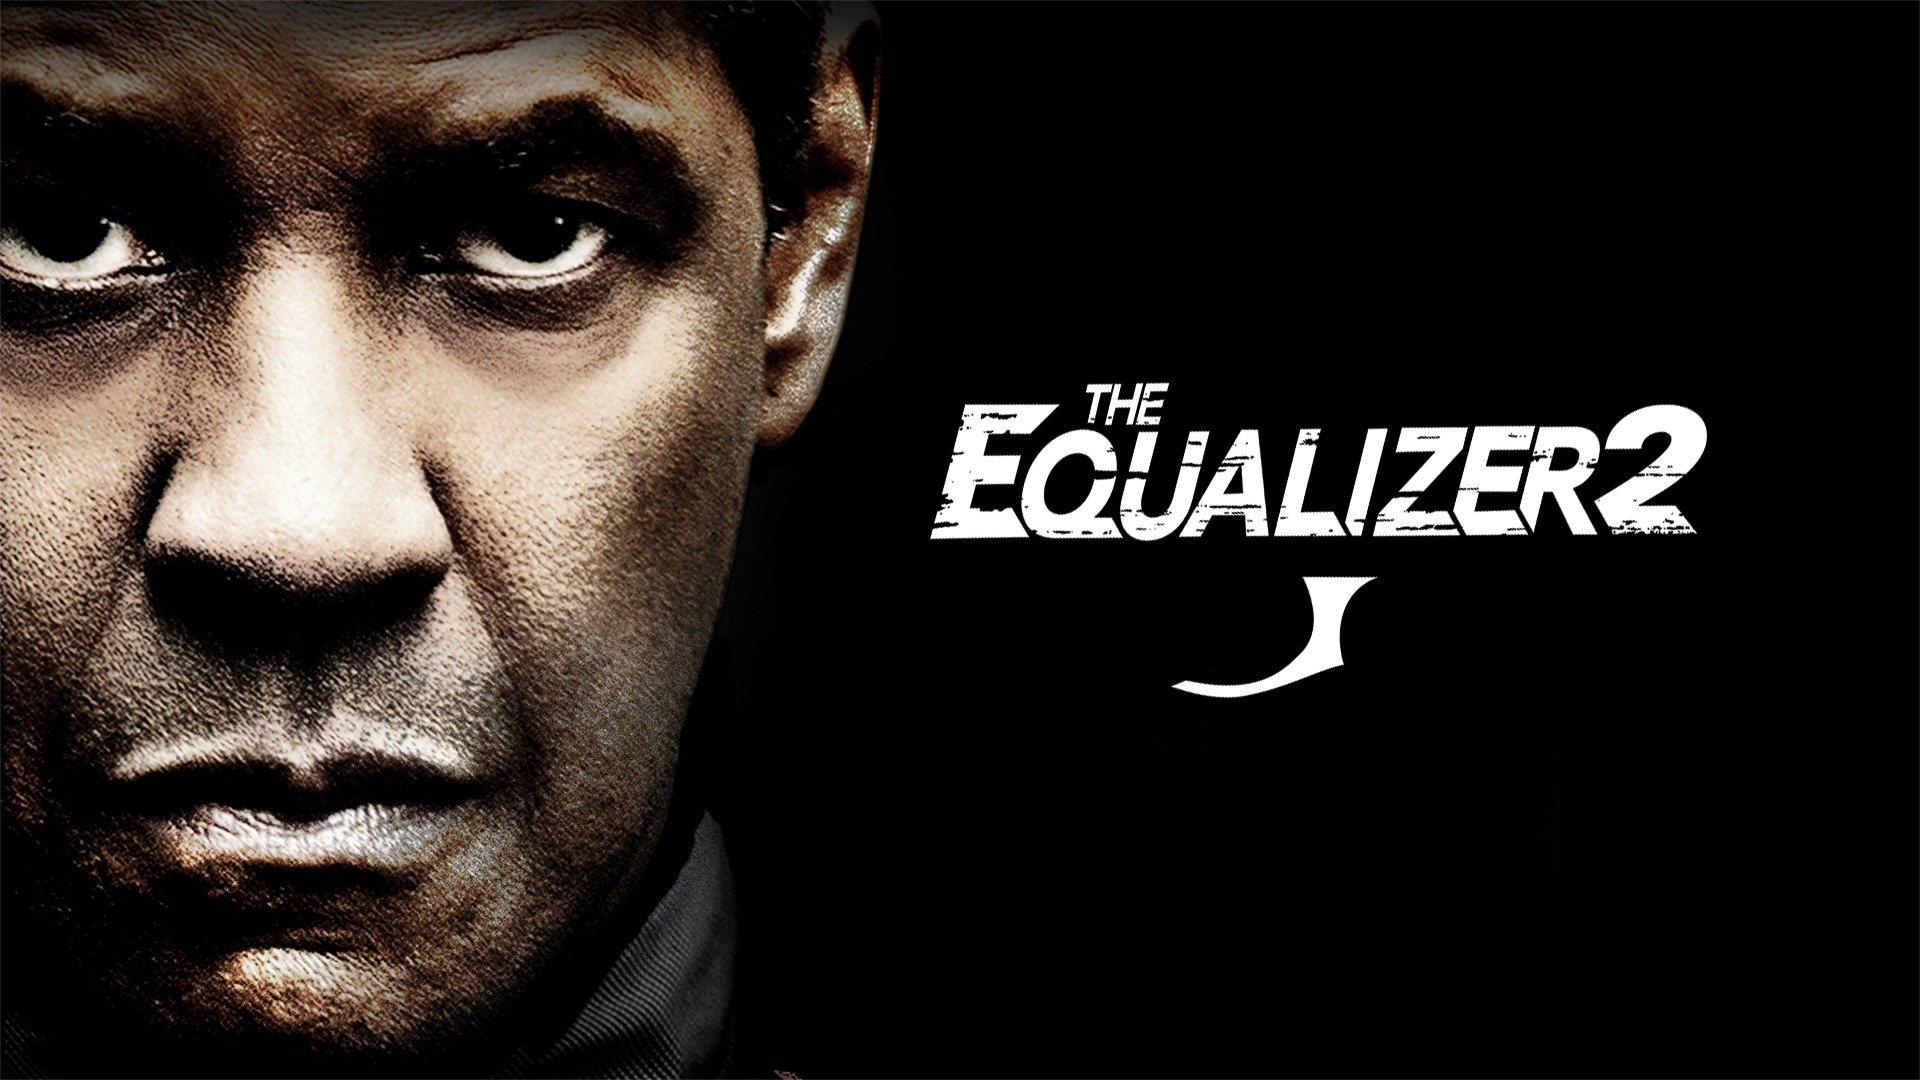 Lab Original ulv Watch The Equalizer 2 Streaming Online on Philo (Free Trial)